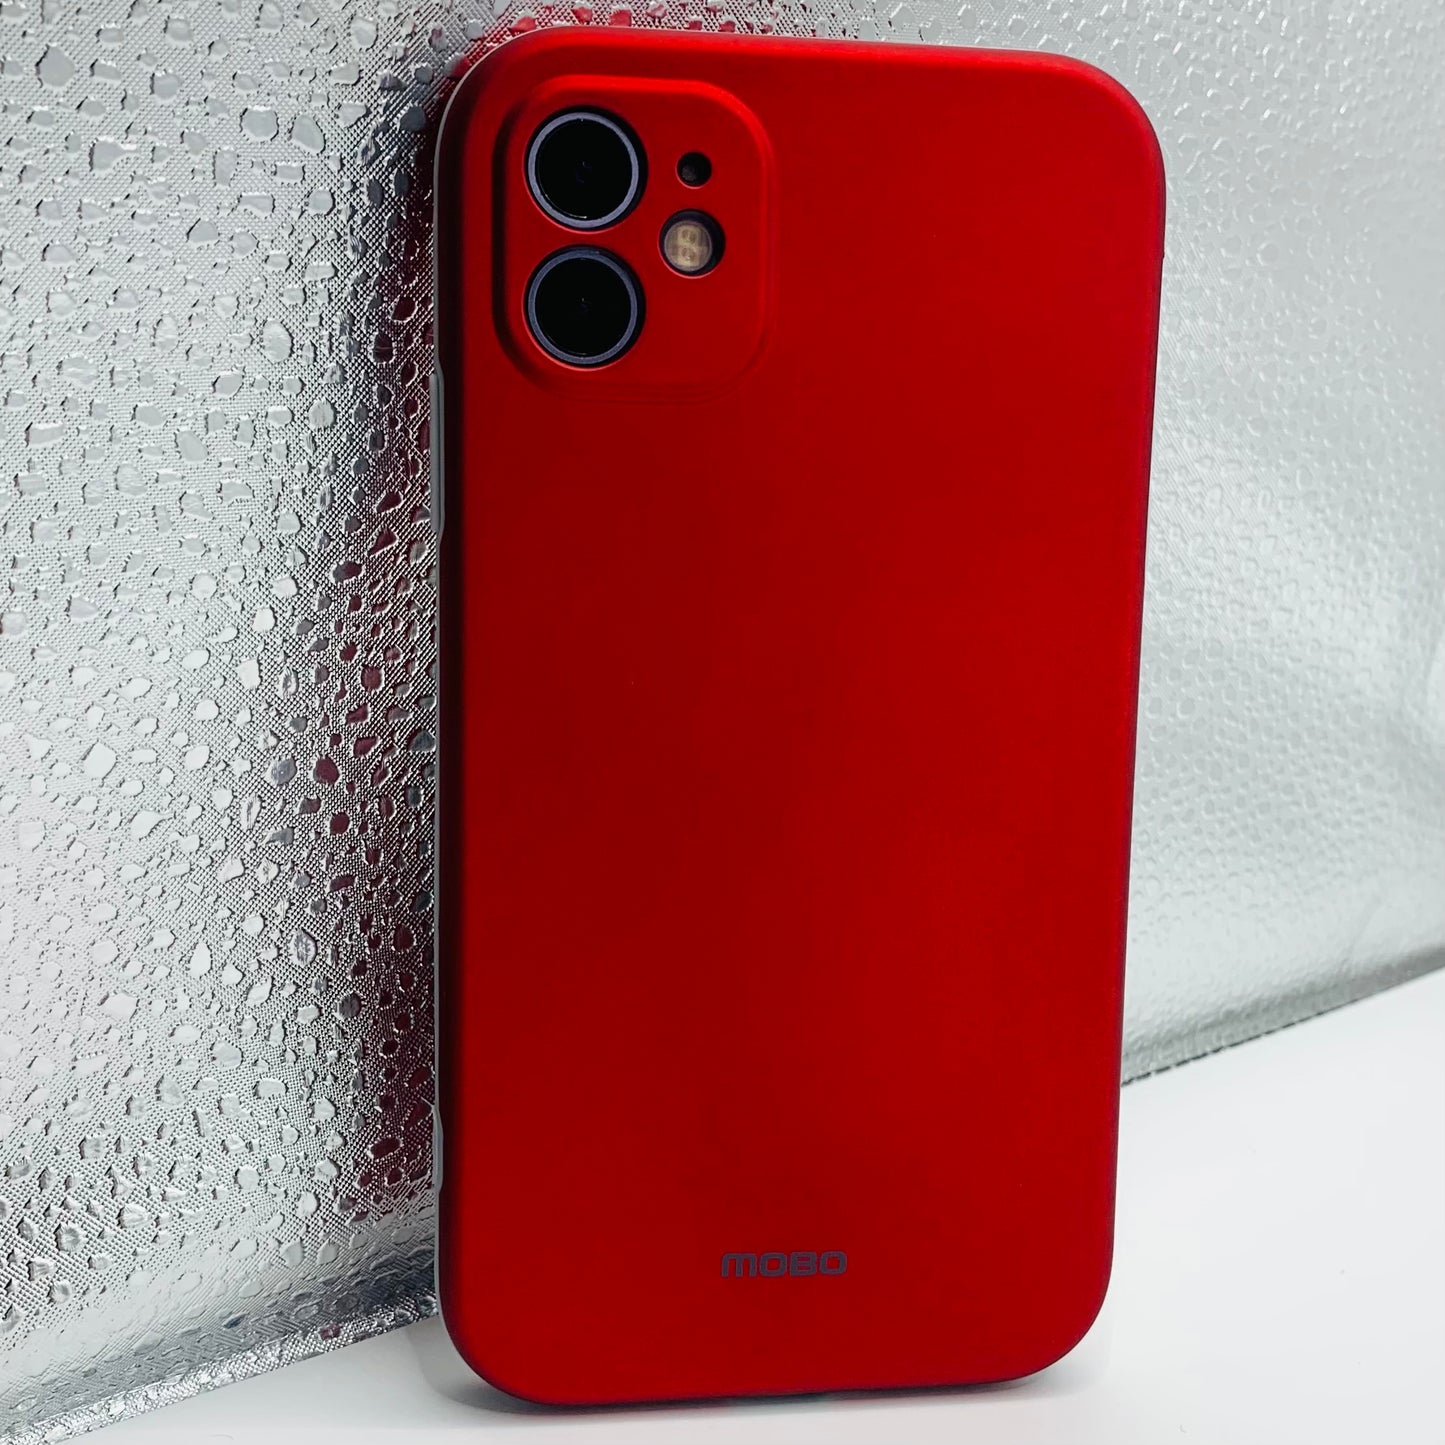 IPHONE 11 PROTECTORES MOBO